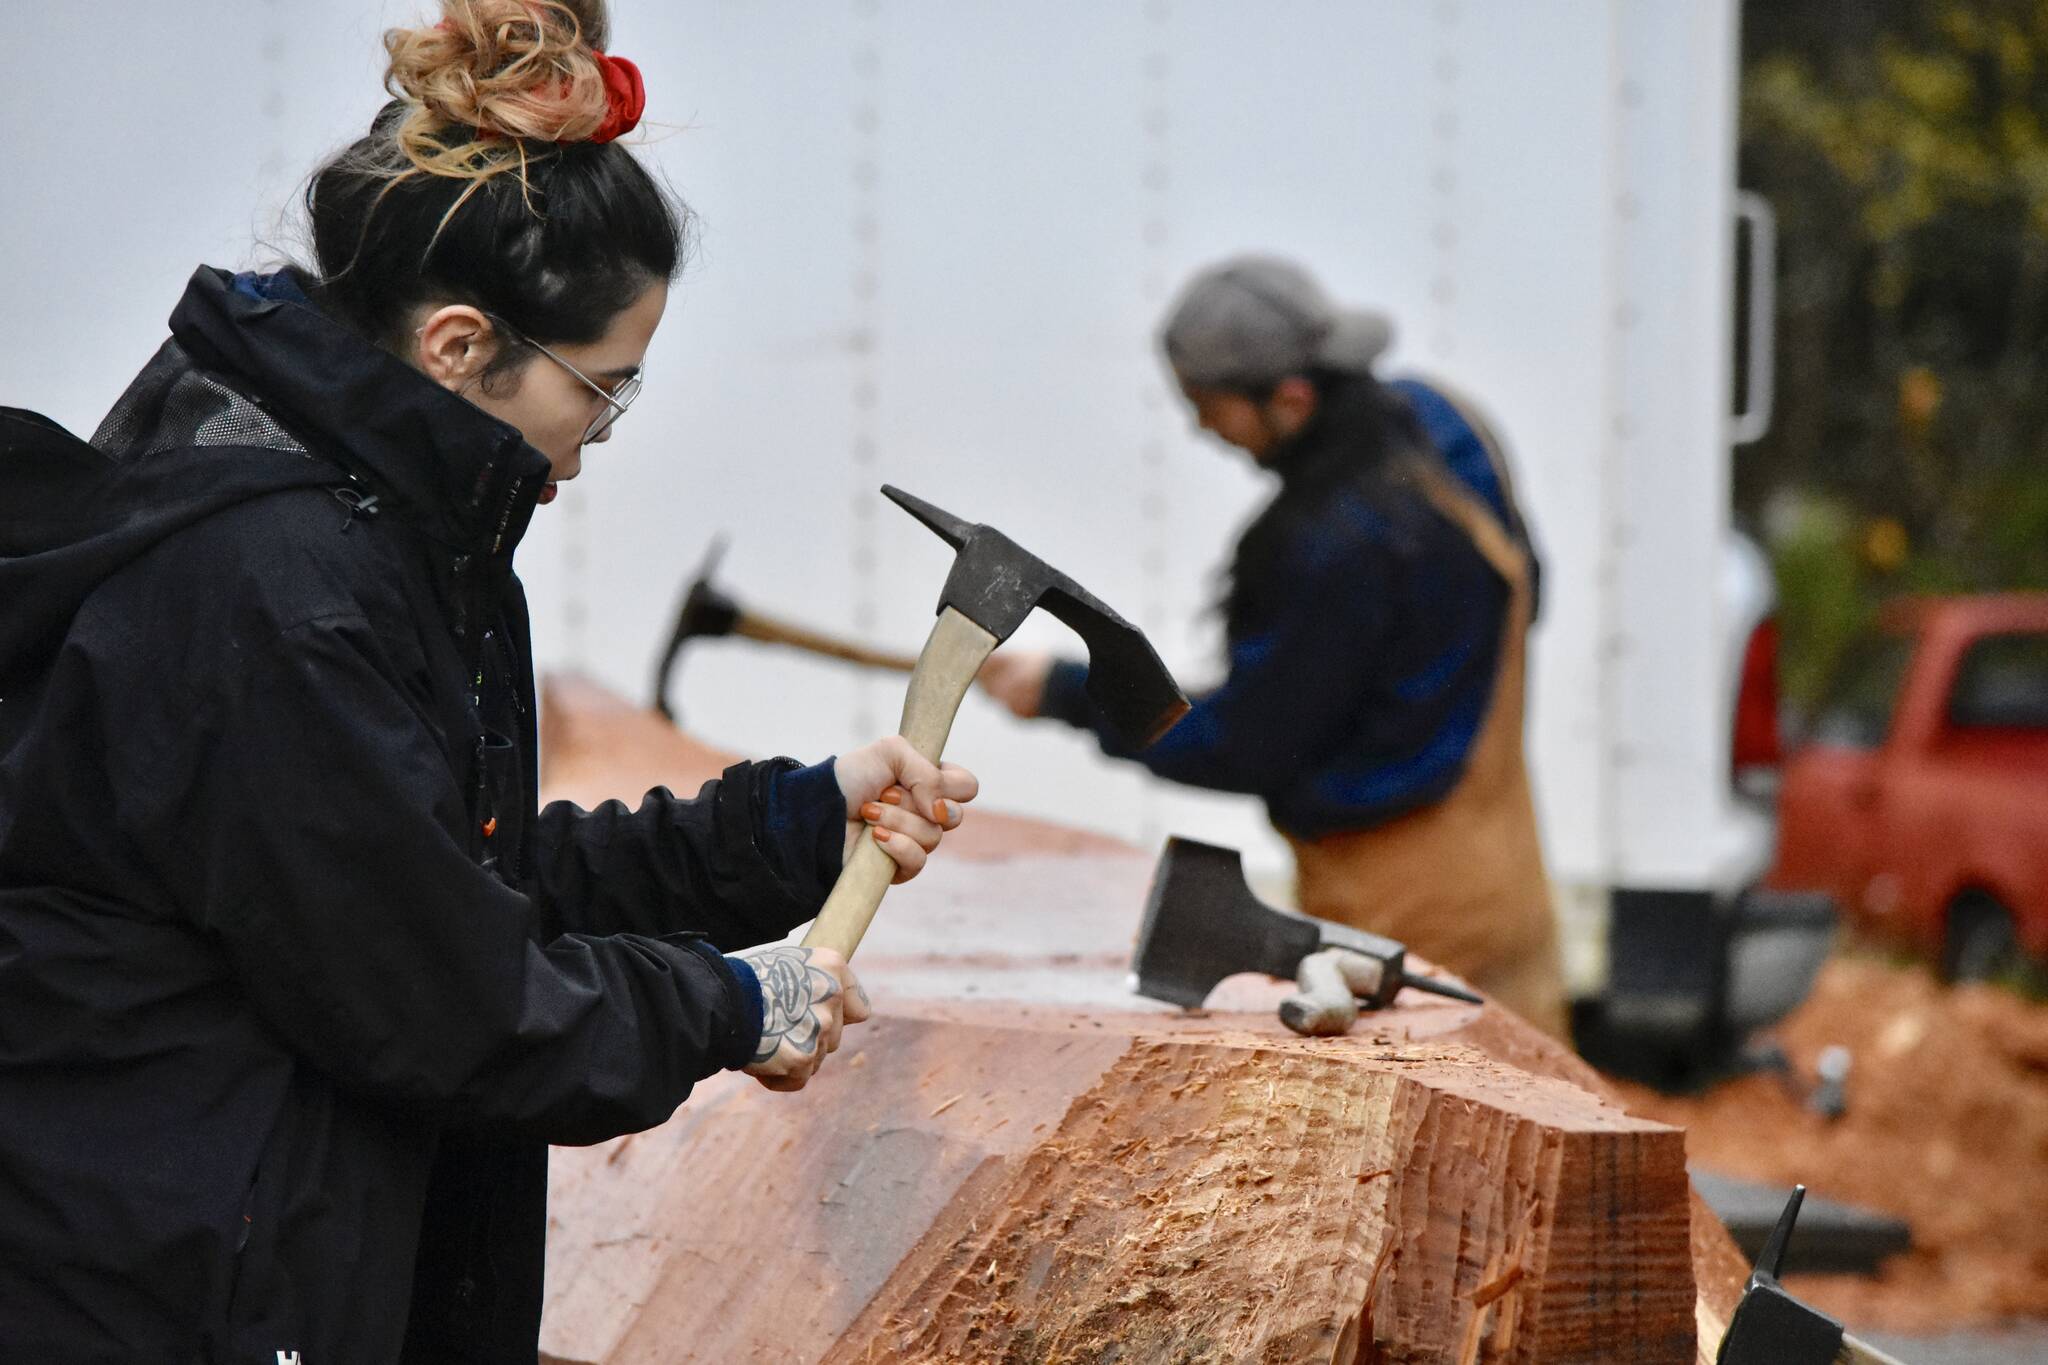 University of Alaska Student Skaydu.û Jules, carves a red cedar log under the supervision of Tlingit master carver Wayne Price in the parking lot of Angoon High School on Tuesday, Oct. 26, 2021. Jules a member of the Teslin Tlingit Council, a self-governing First Nation based in Teslin in Southern Yukon Territory, Canada, and said she wants to become a Tlingit language teacher. (Peter Segall / Juneau Empire)